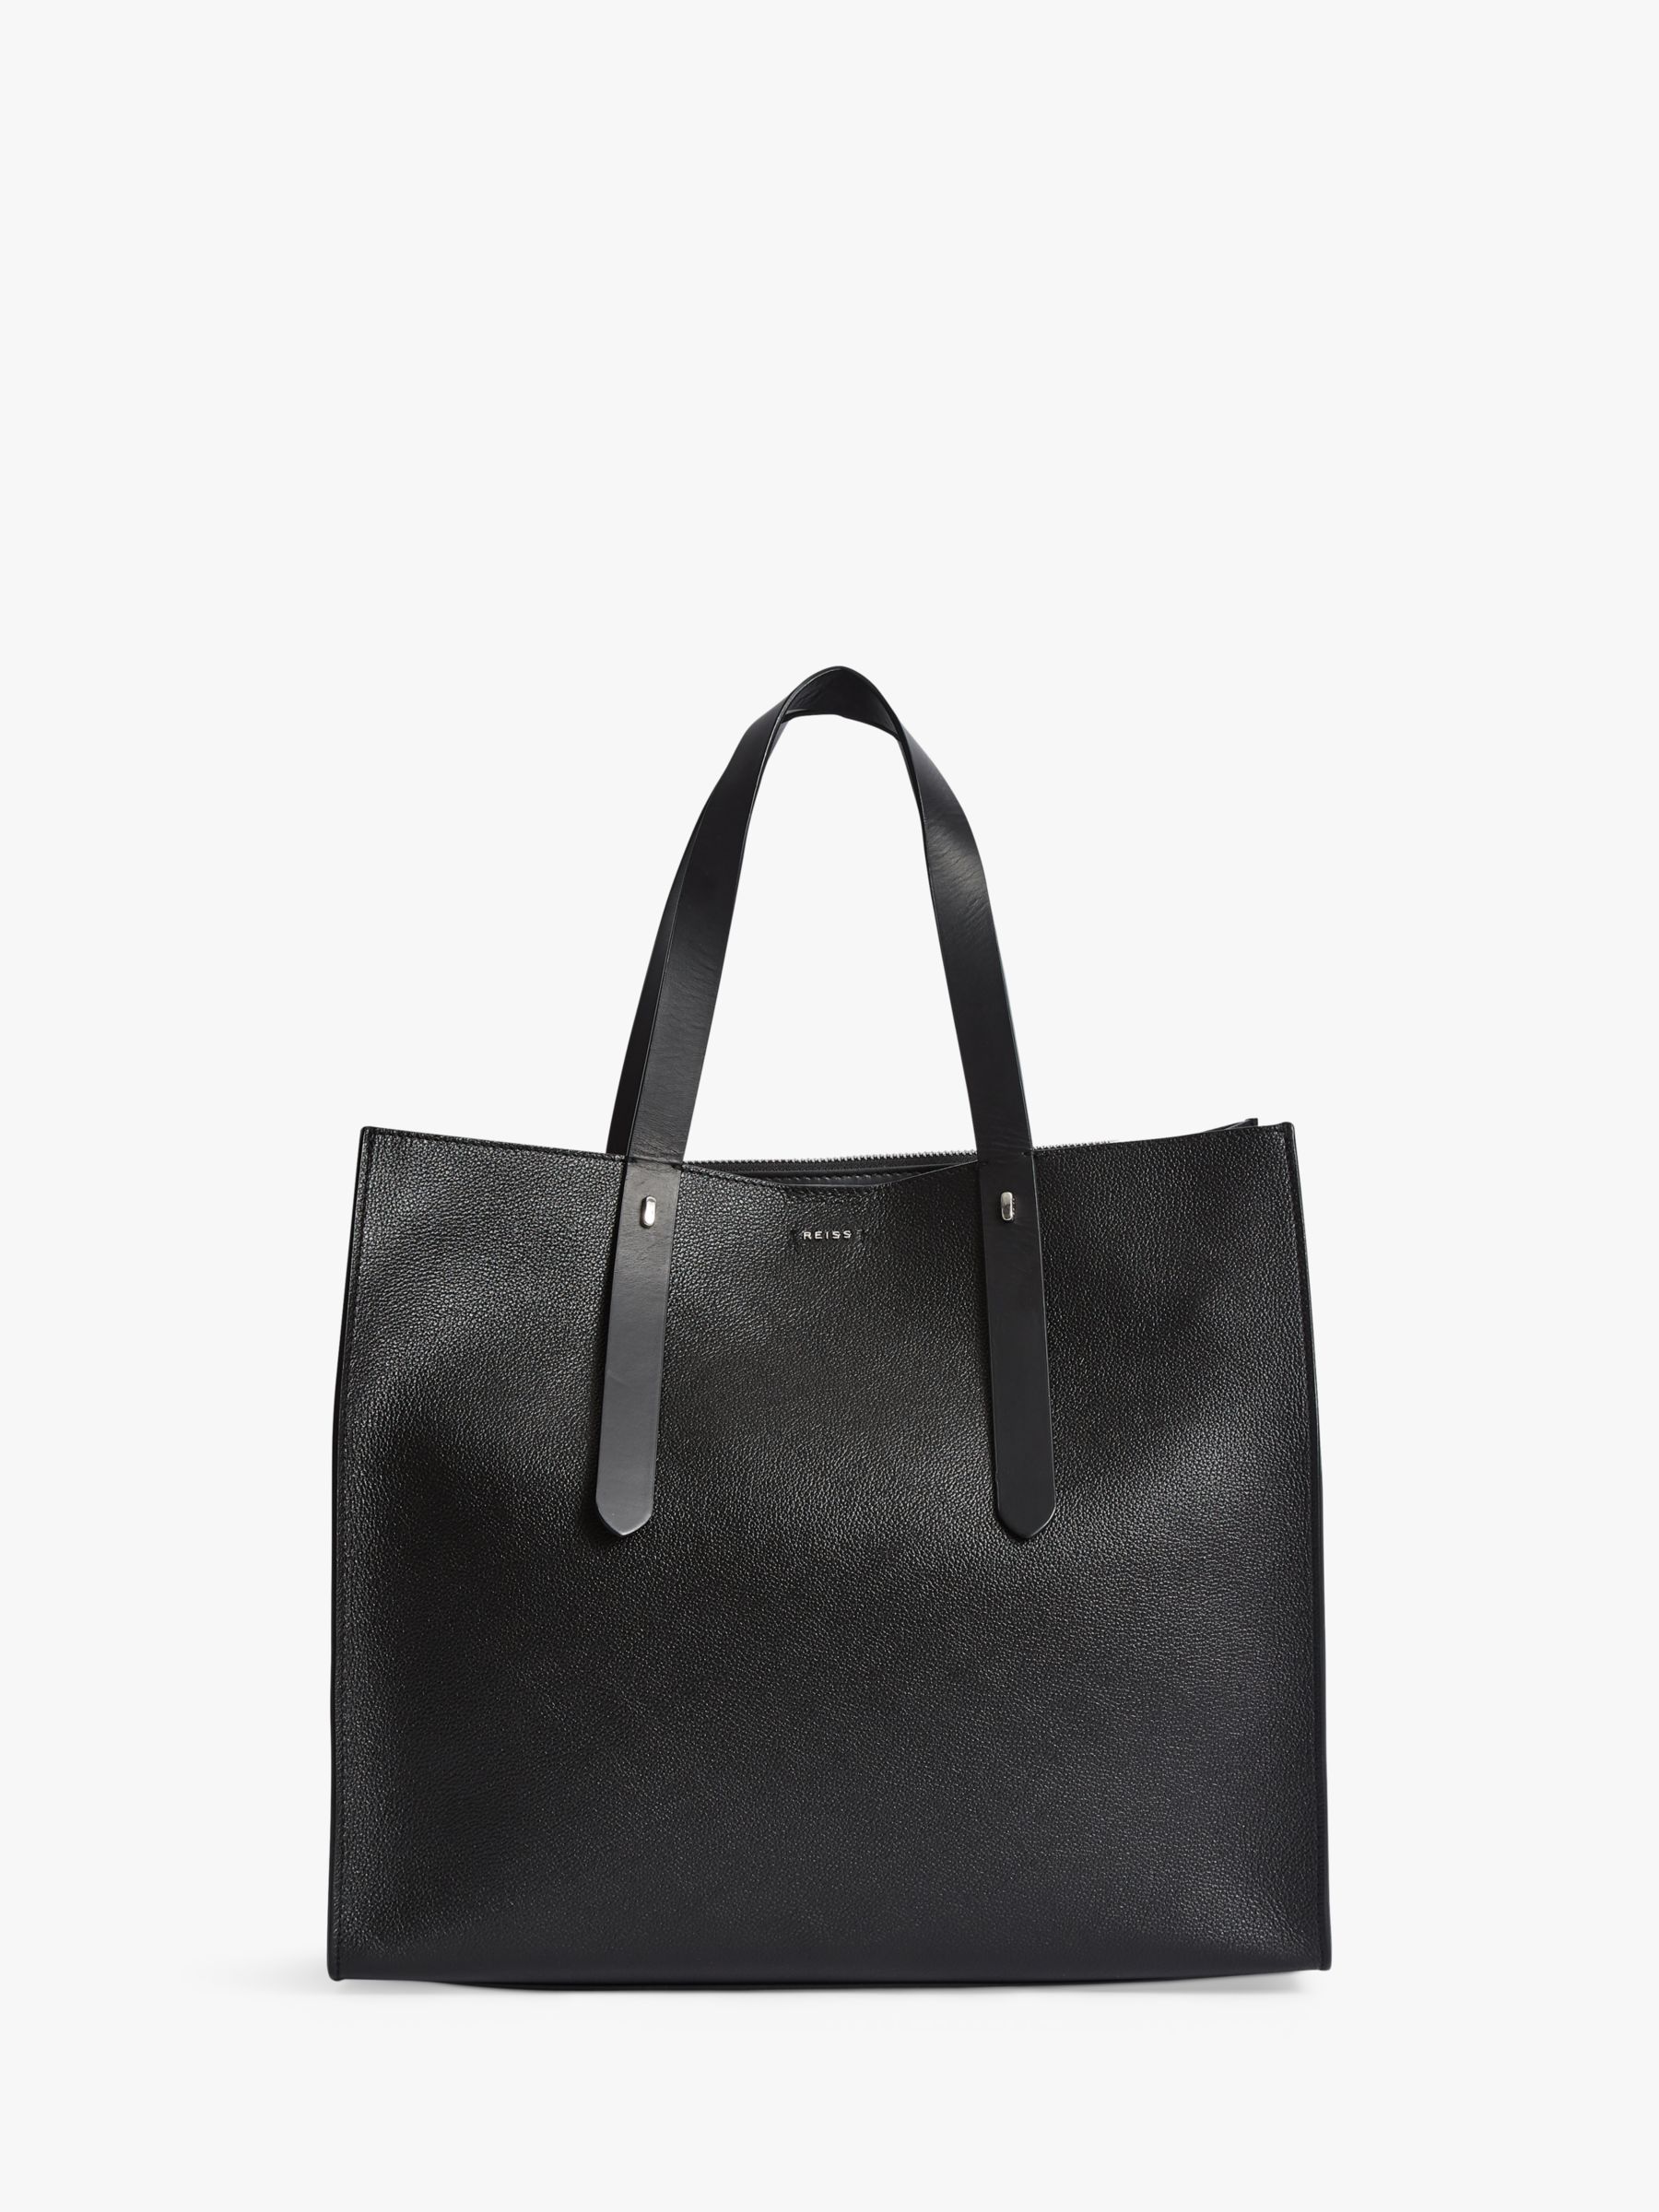 Reiss Swaby Leather Tote Bag, Black